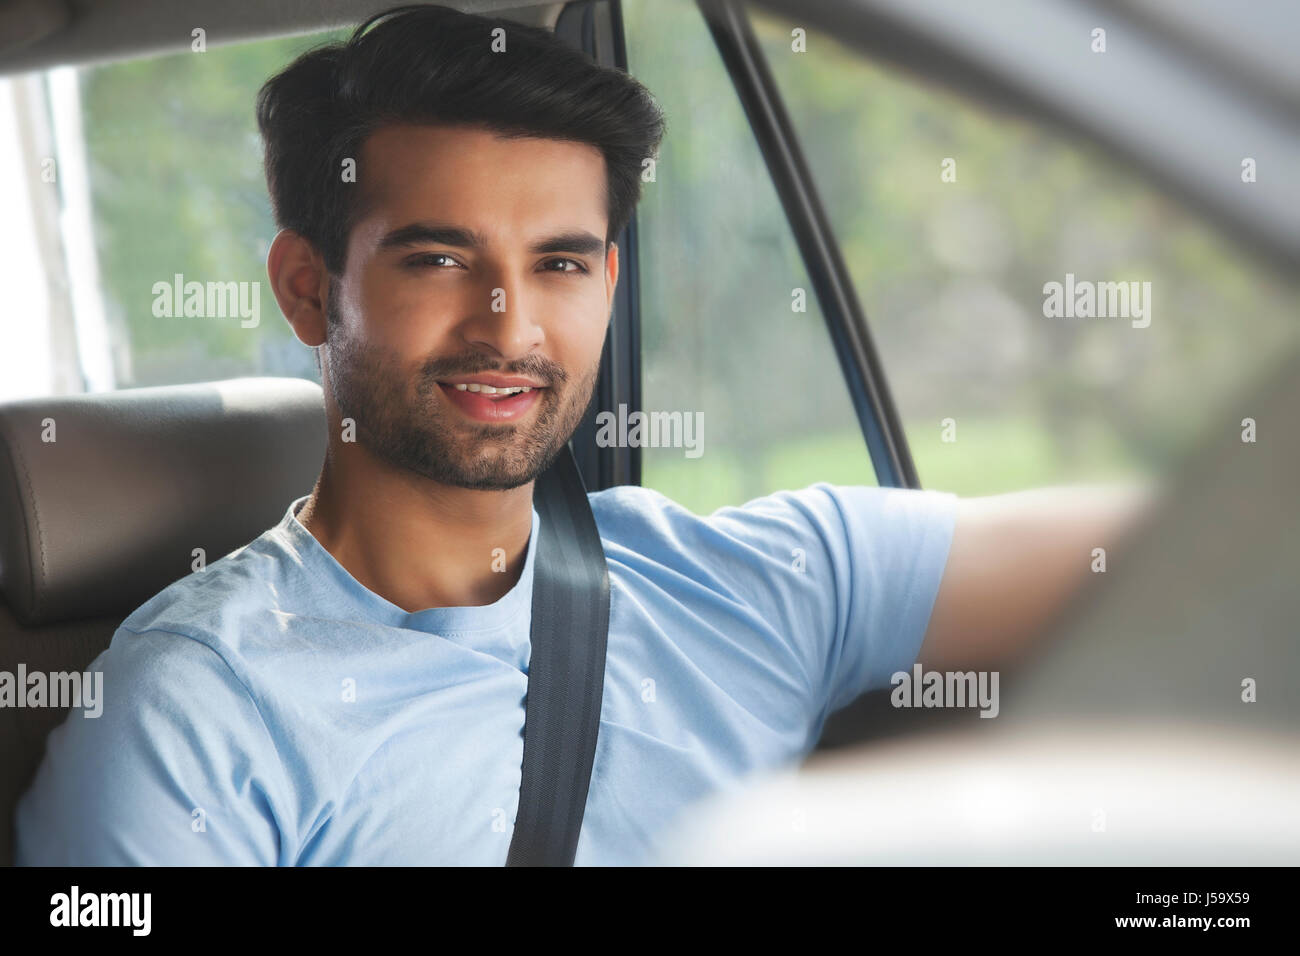 Portrait of young man sitting in car Stock Photo